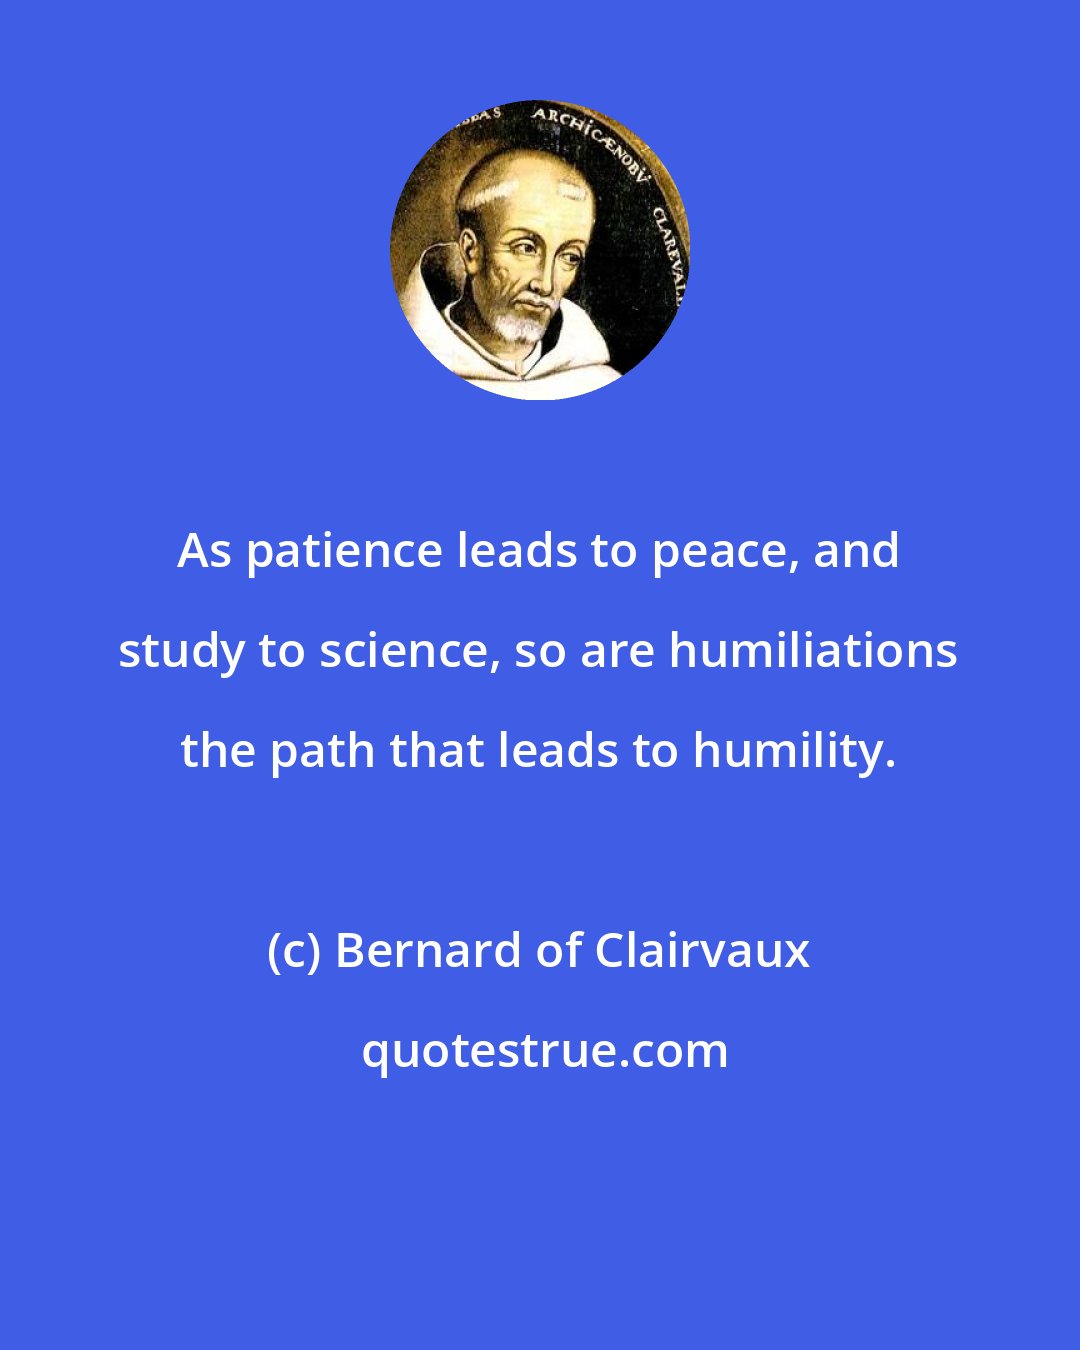 Bernard of Clairvaux: As patience leads to peace, and study to science, so are humiliations the path that leads to humility.